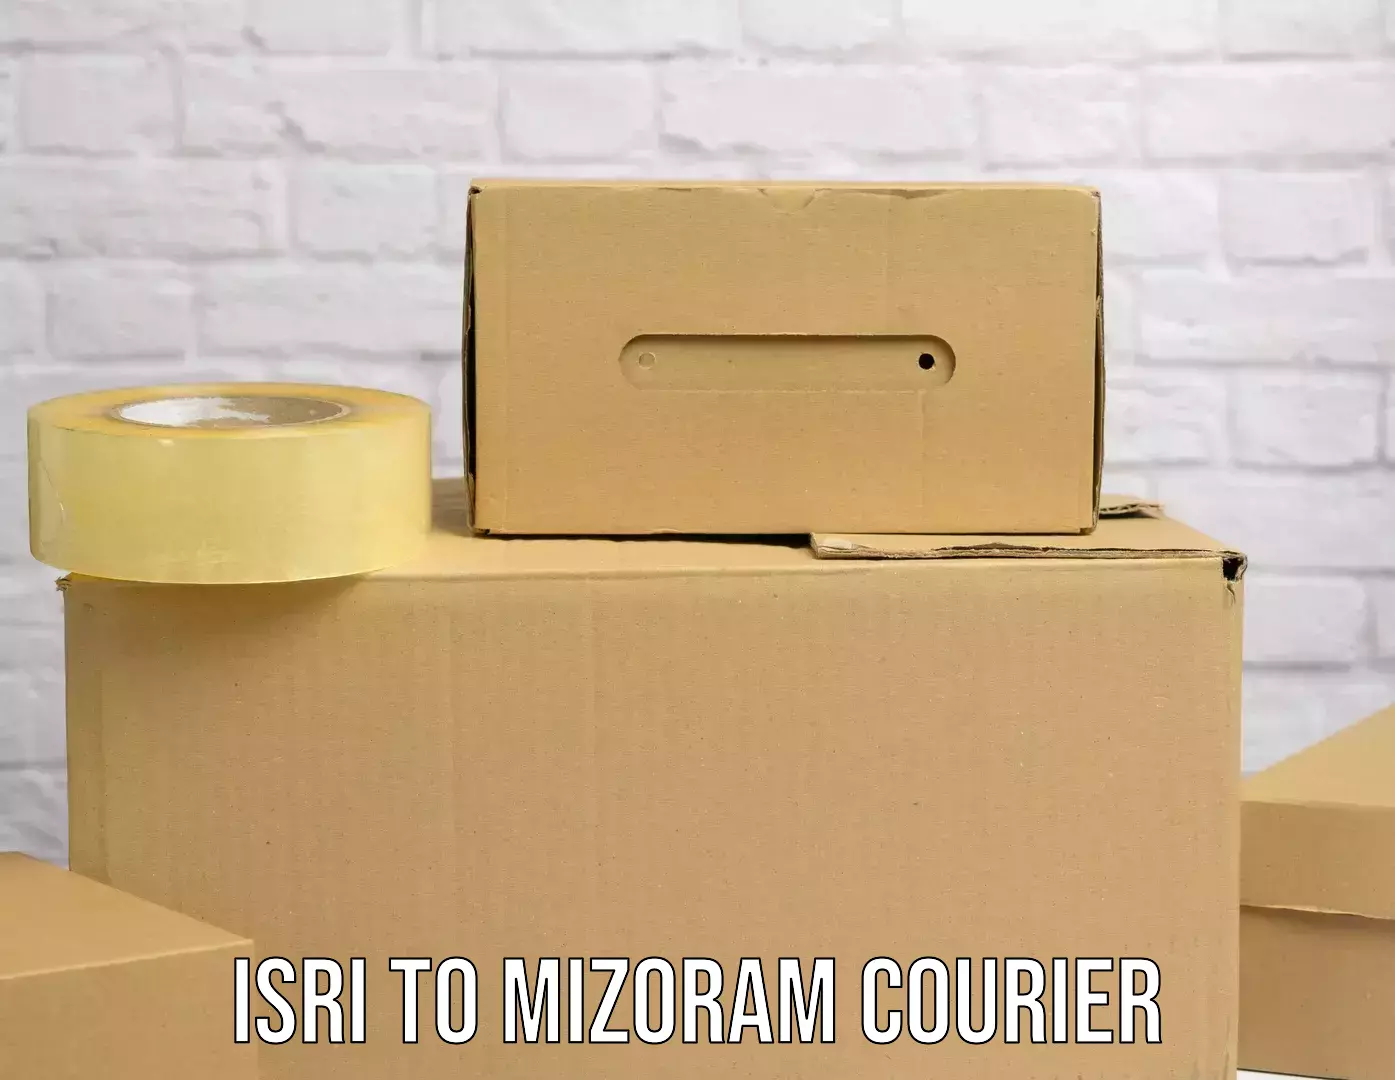 Express package services Isri to Mizoram